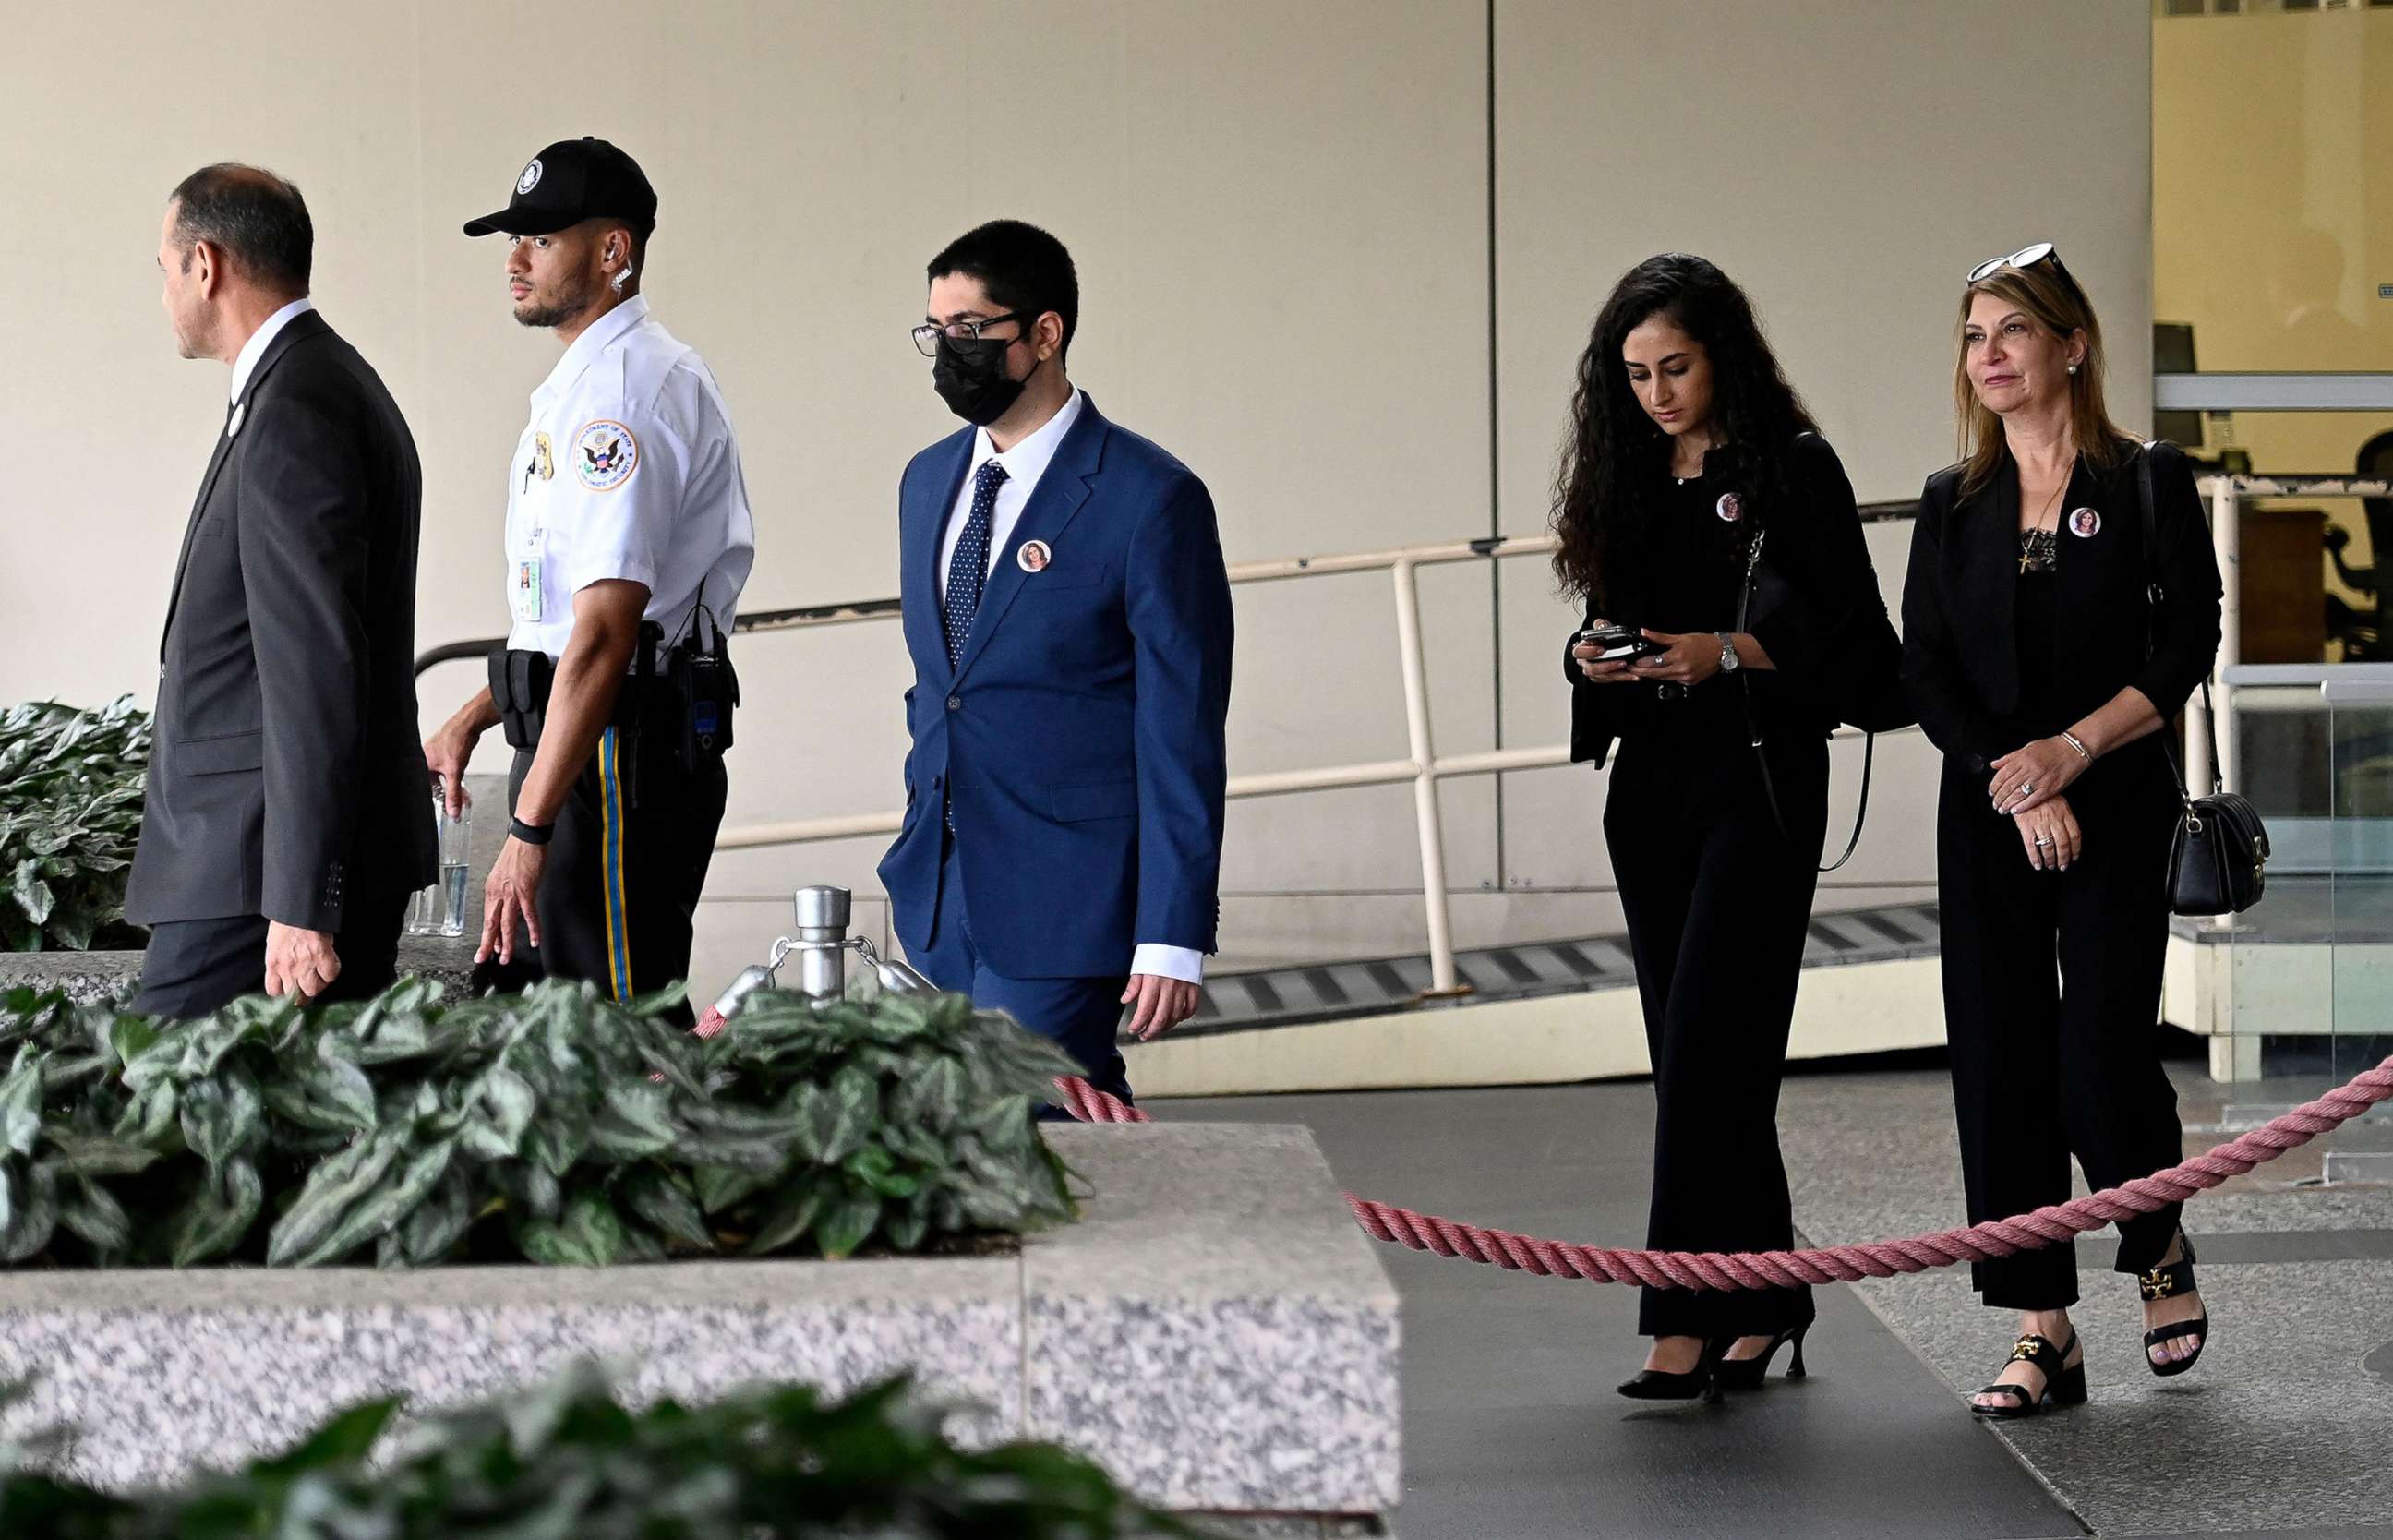 PHOTO: The family of Palestinian-American journalist Shireen Abu Akleh leave the State Department in Washington, DC, July 26, 2022, after meeting with US Secretary of State Antony Blinken.